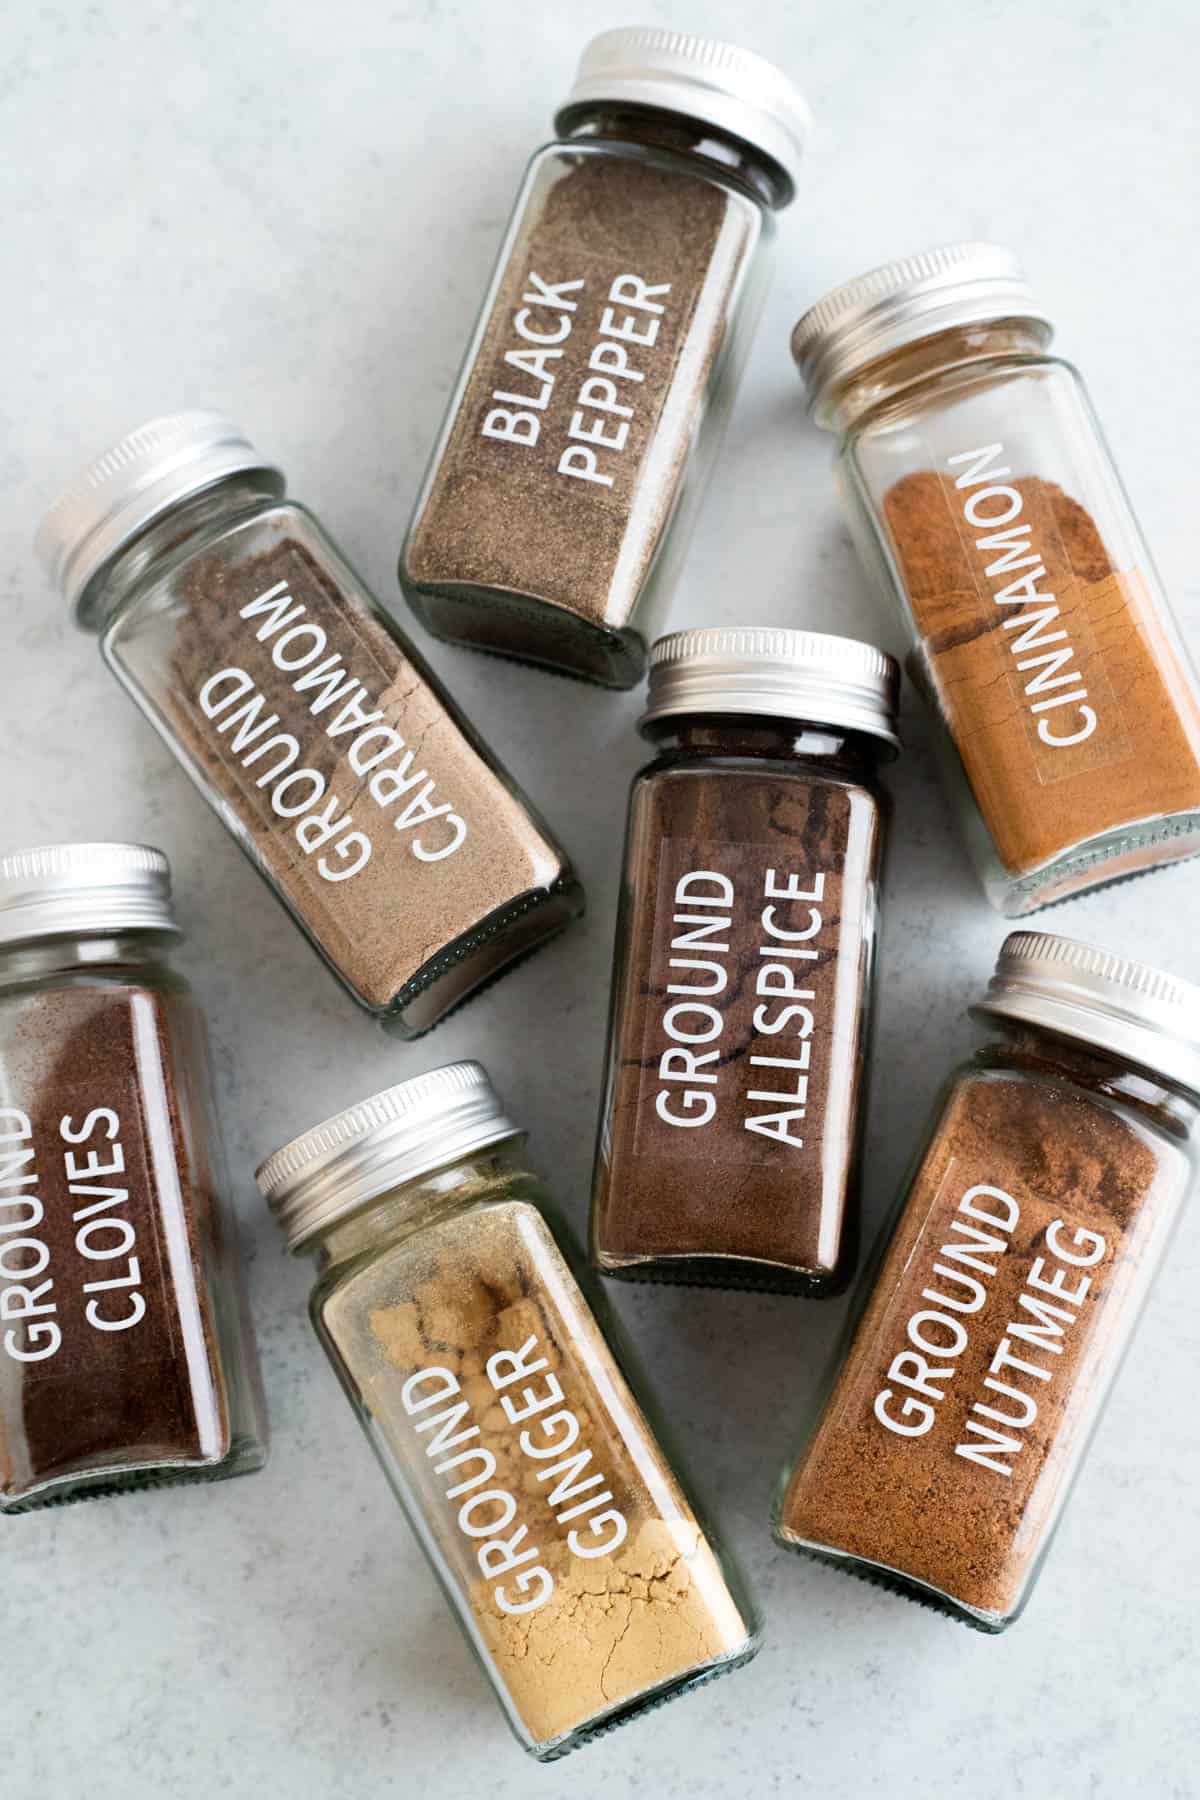 Glass jars of spices laying on a marble surface.